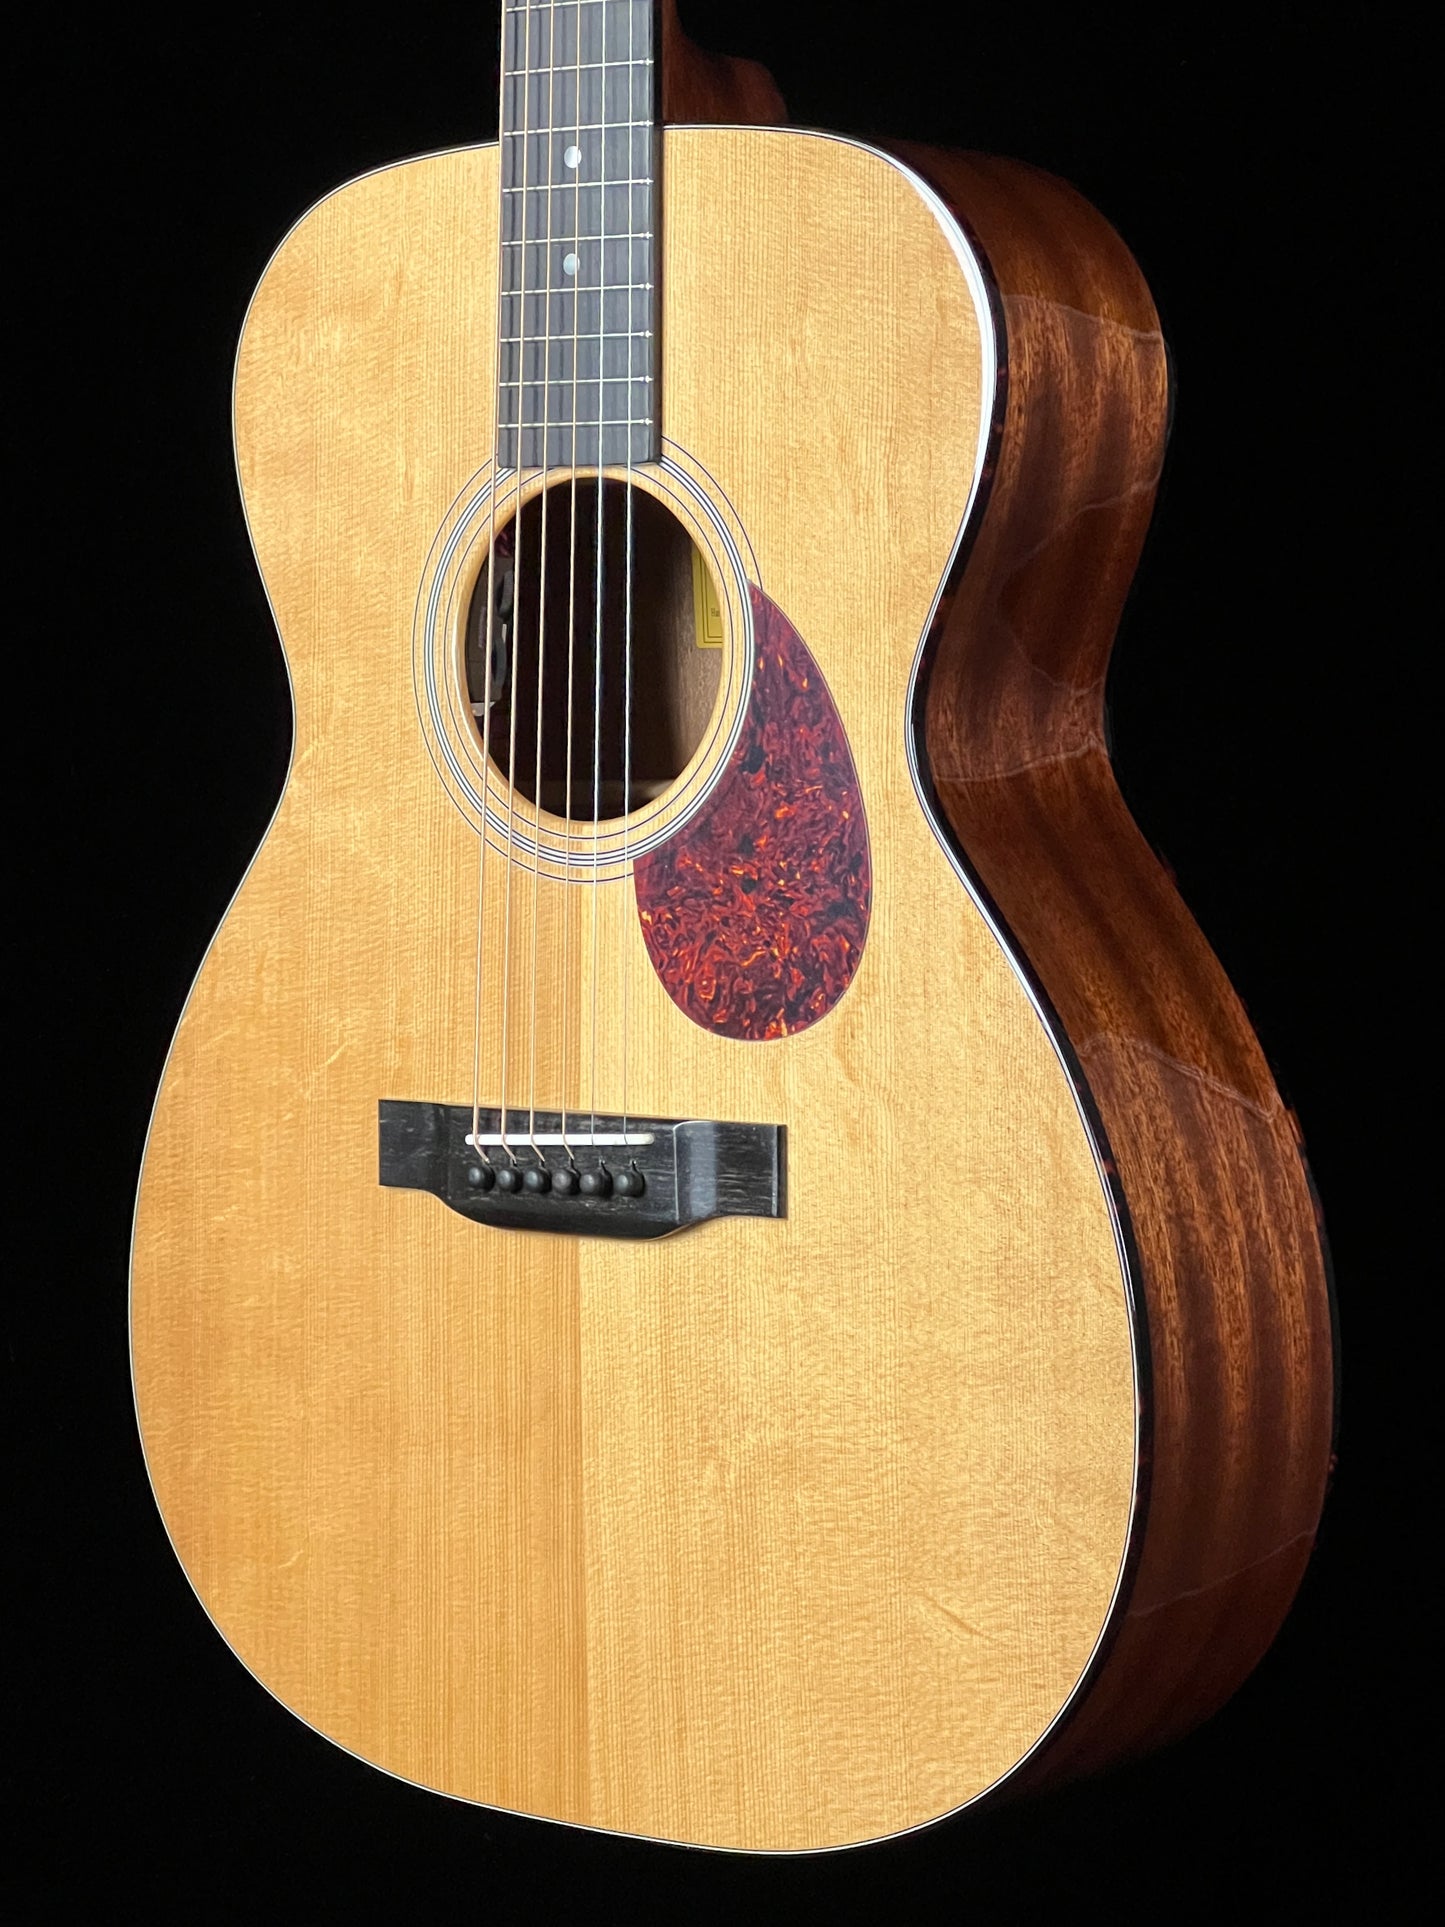 SOLD - Eastman E1 OM-DLX Sitka Spruce and Sapele Acoustic Guitar with Fishman Pick Up - New